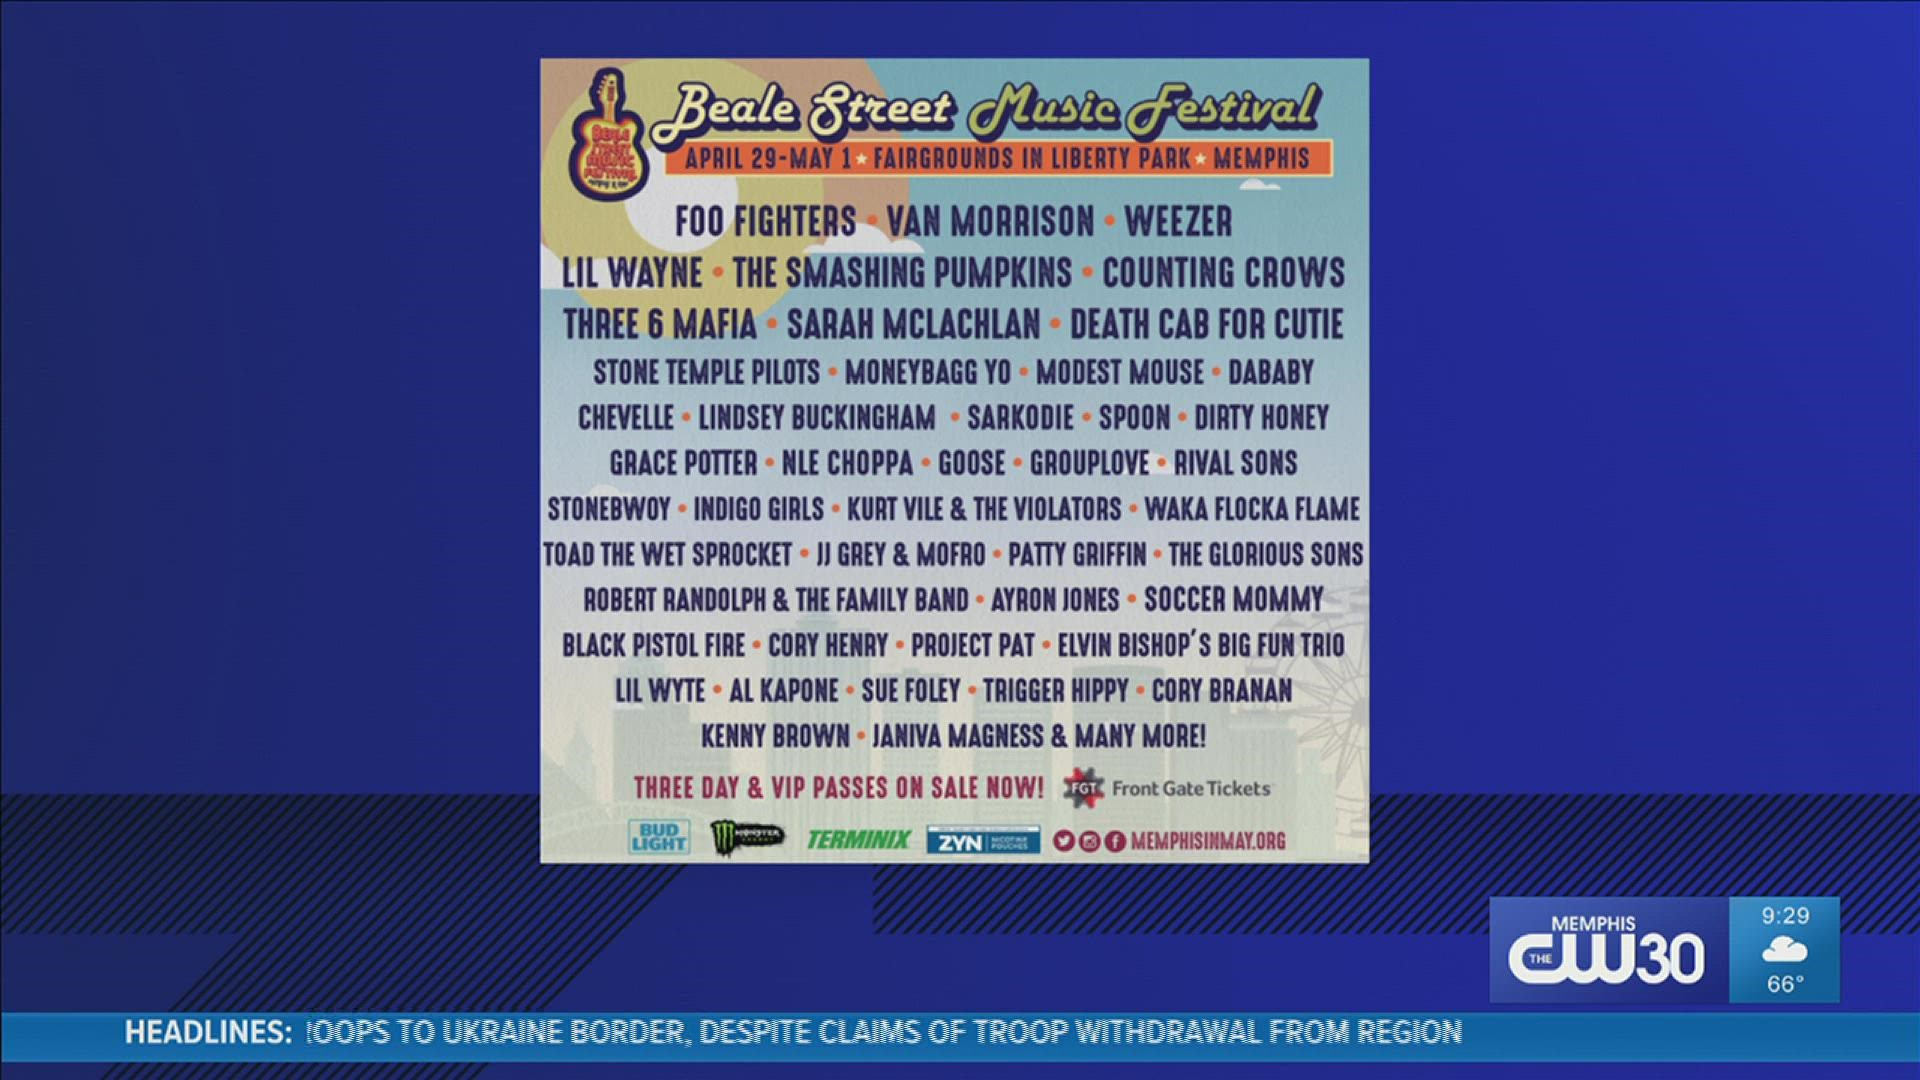 Memphis in May officials released the full lineup for this year’s festival, set for April 29 – May 1 at Liberty Park (former Mid-South Fairgrounds).